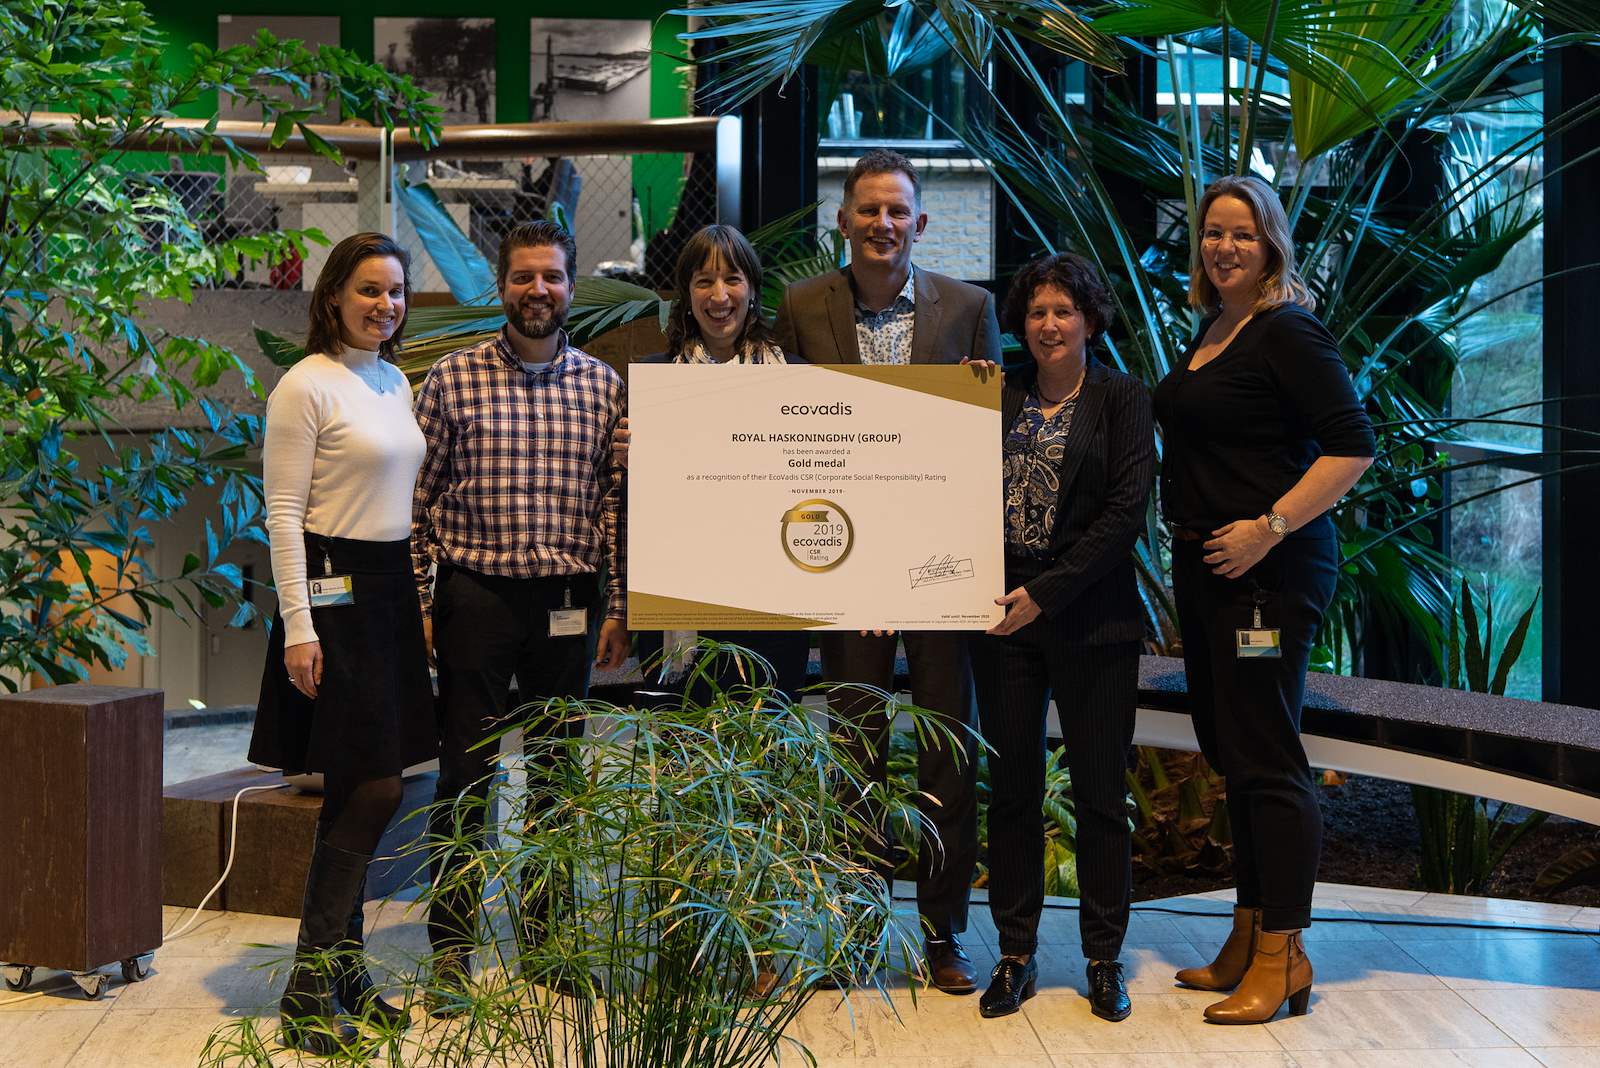 Colleagues celebrating the obtained EcoVadis gold medal in 2019 for the fourth consecutive year